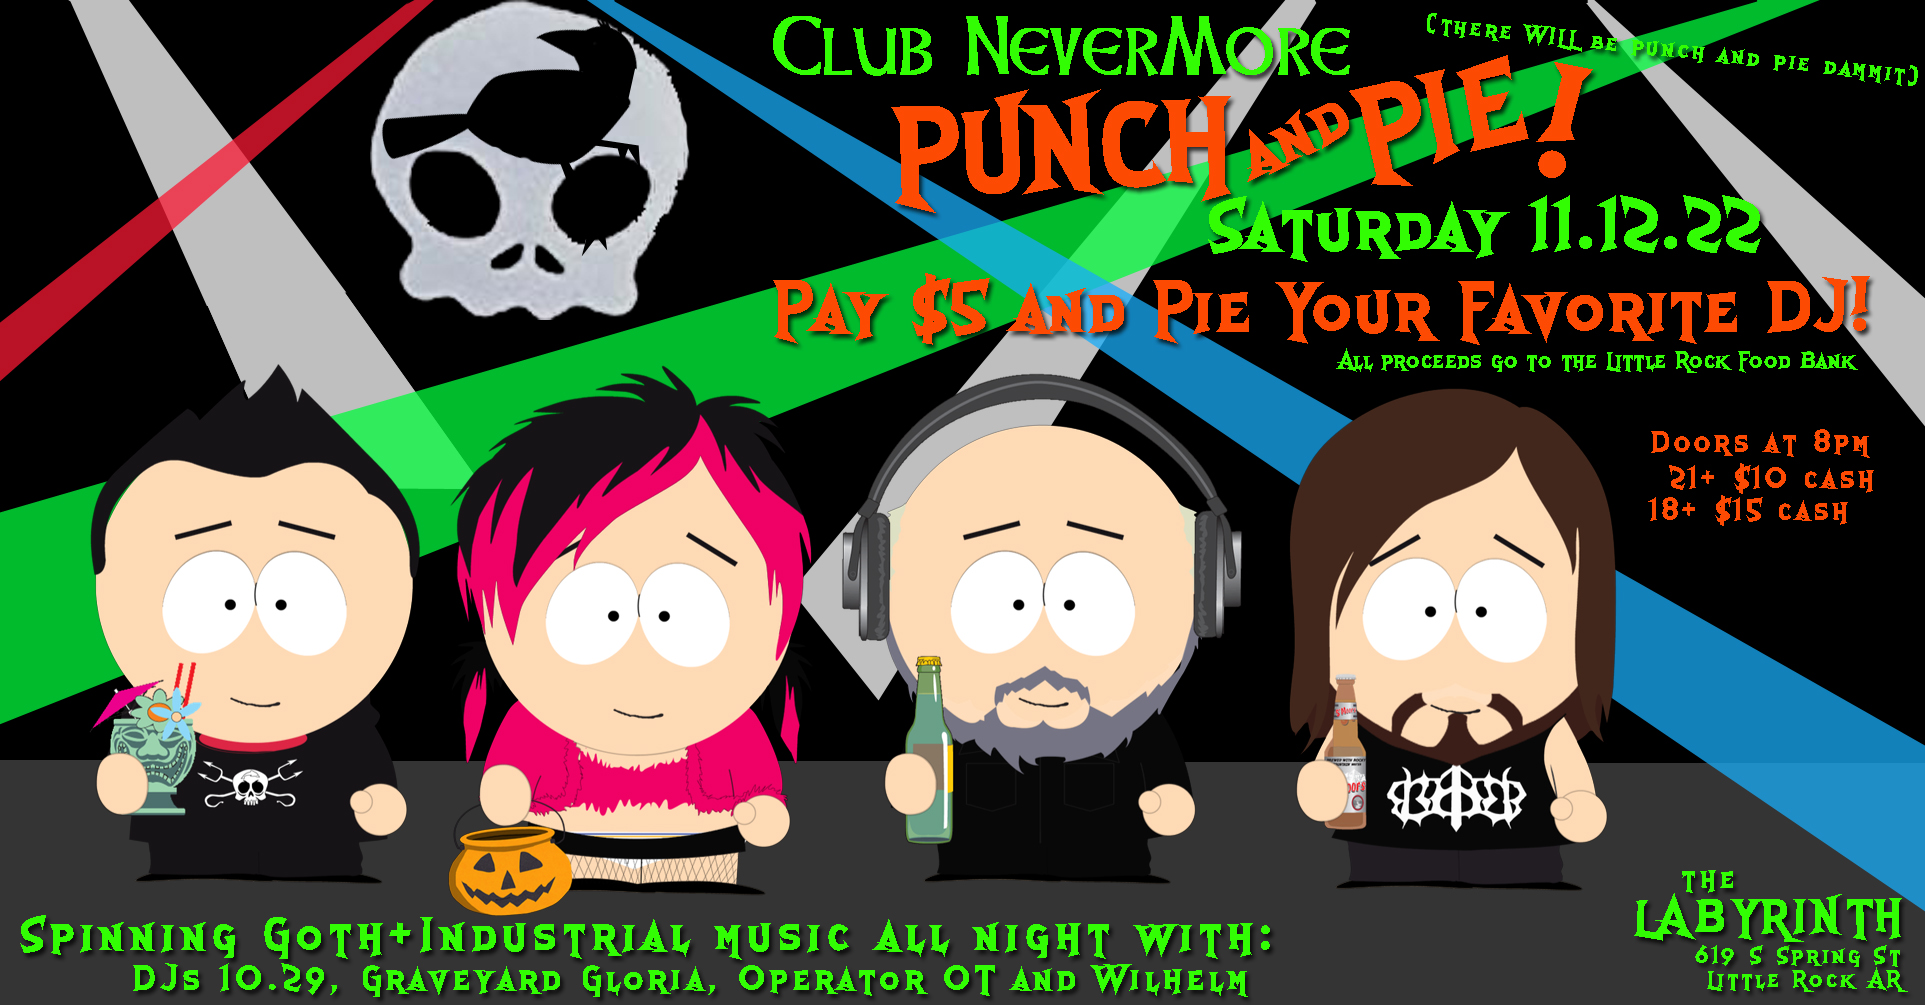 Flyer for Club Nevermore&rsquo;s Punch and Pie Event. It shows a drawing in the style of the show South Park. The text says, &ldquo;Club Nevermore Punch and Pie. (There will be punch and pie dammit!) Saturday, November 12, 2022. Pay $5 and pie your favorite DJ. All proceeds go to the Little Rock Food Bank. Doors at at 8PM. Admission is $10 for ages 21+, $15 for under 21. 